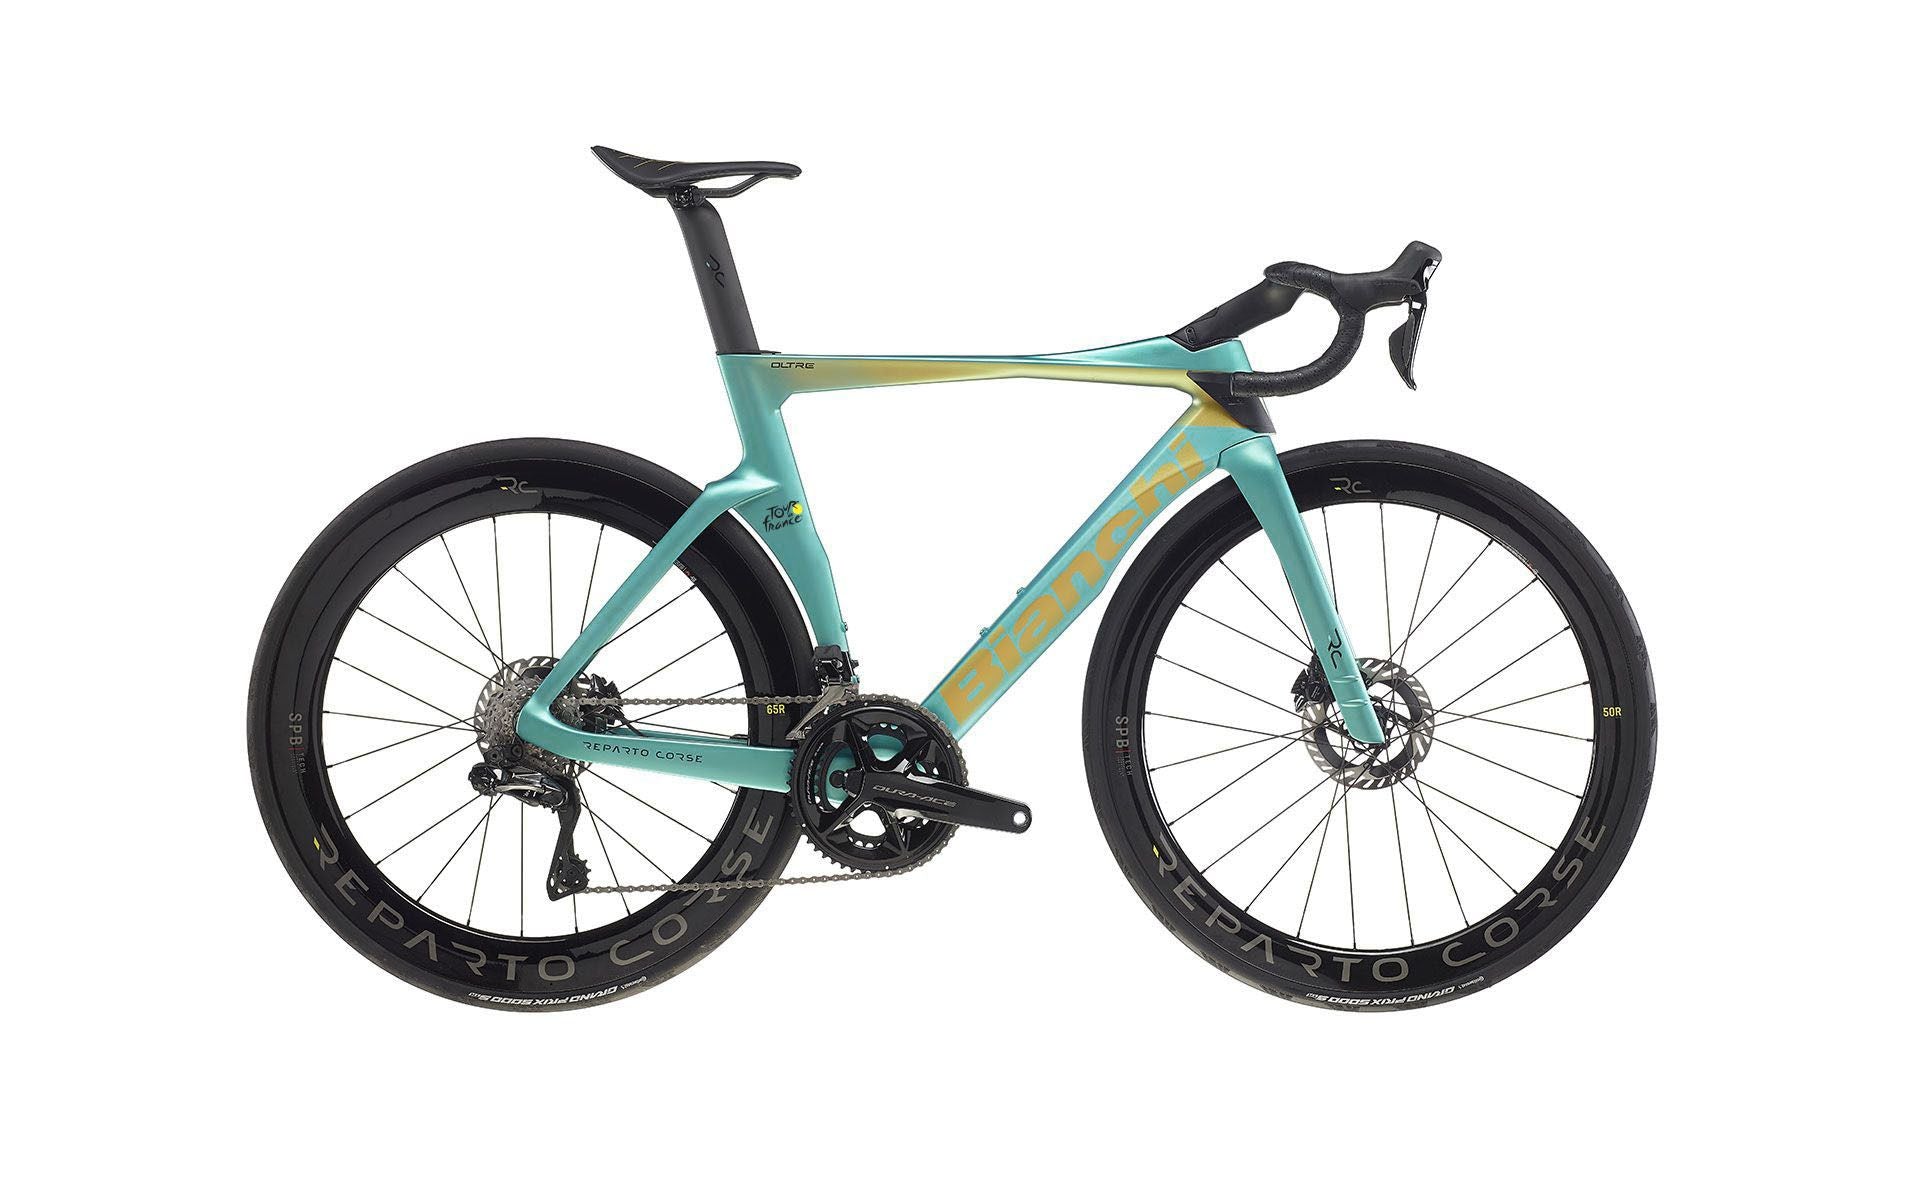 BIANCHI - Oltre Tour the France limited edition